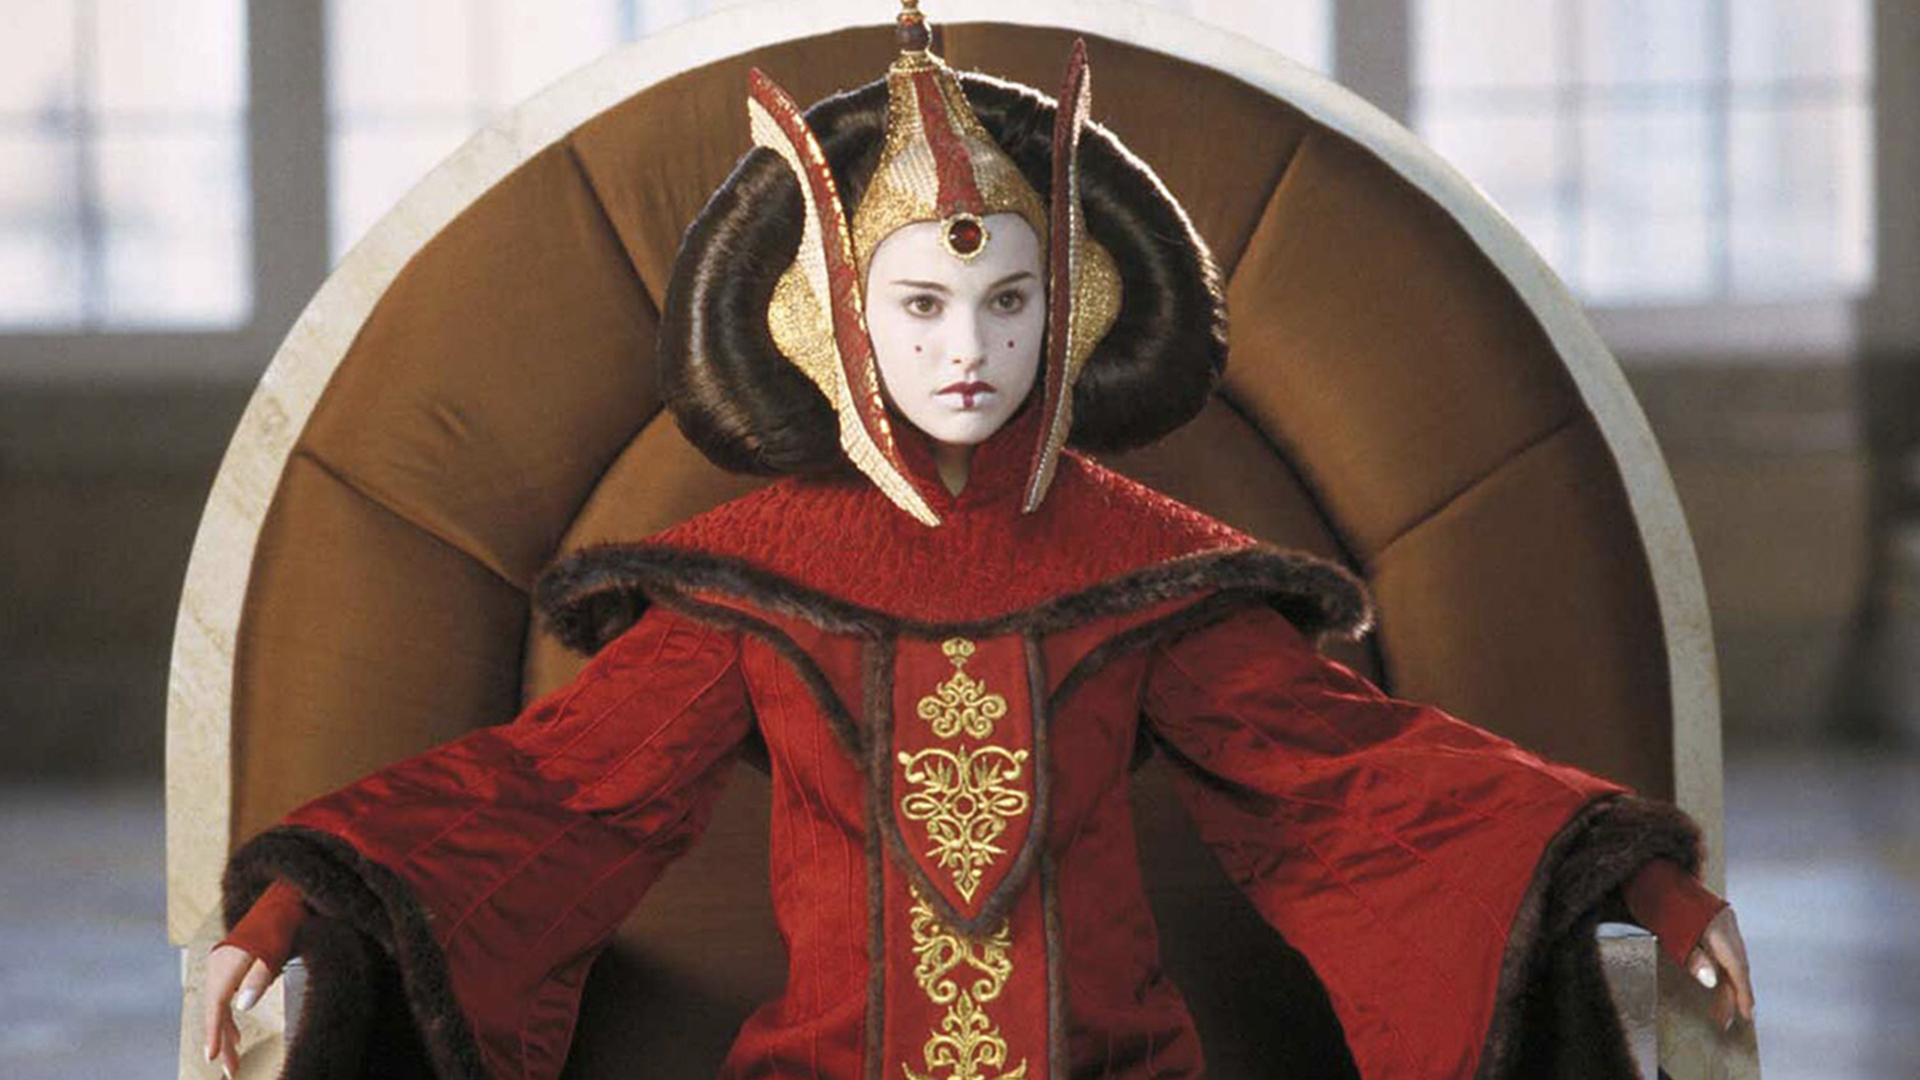 Padmé Amidala from Star Wars in her headdress and gown